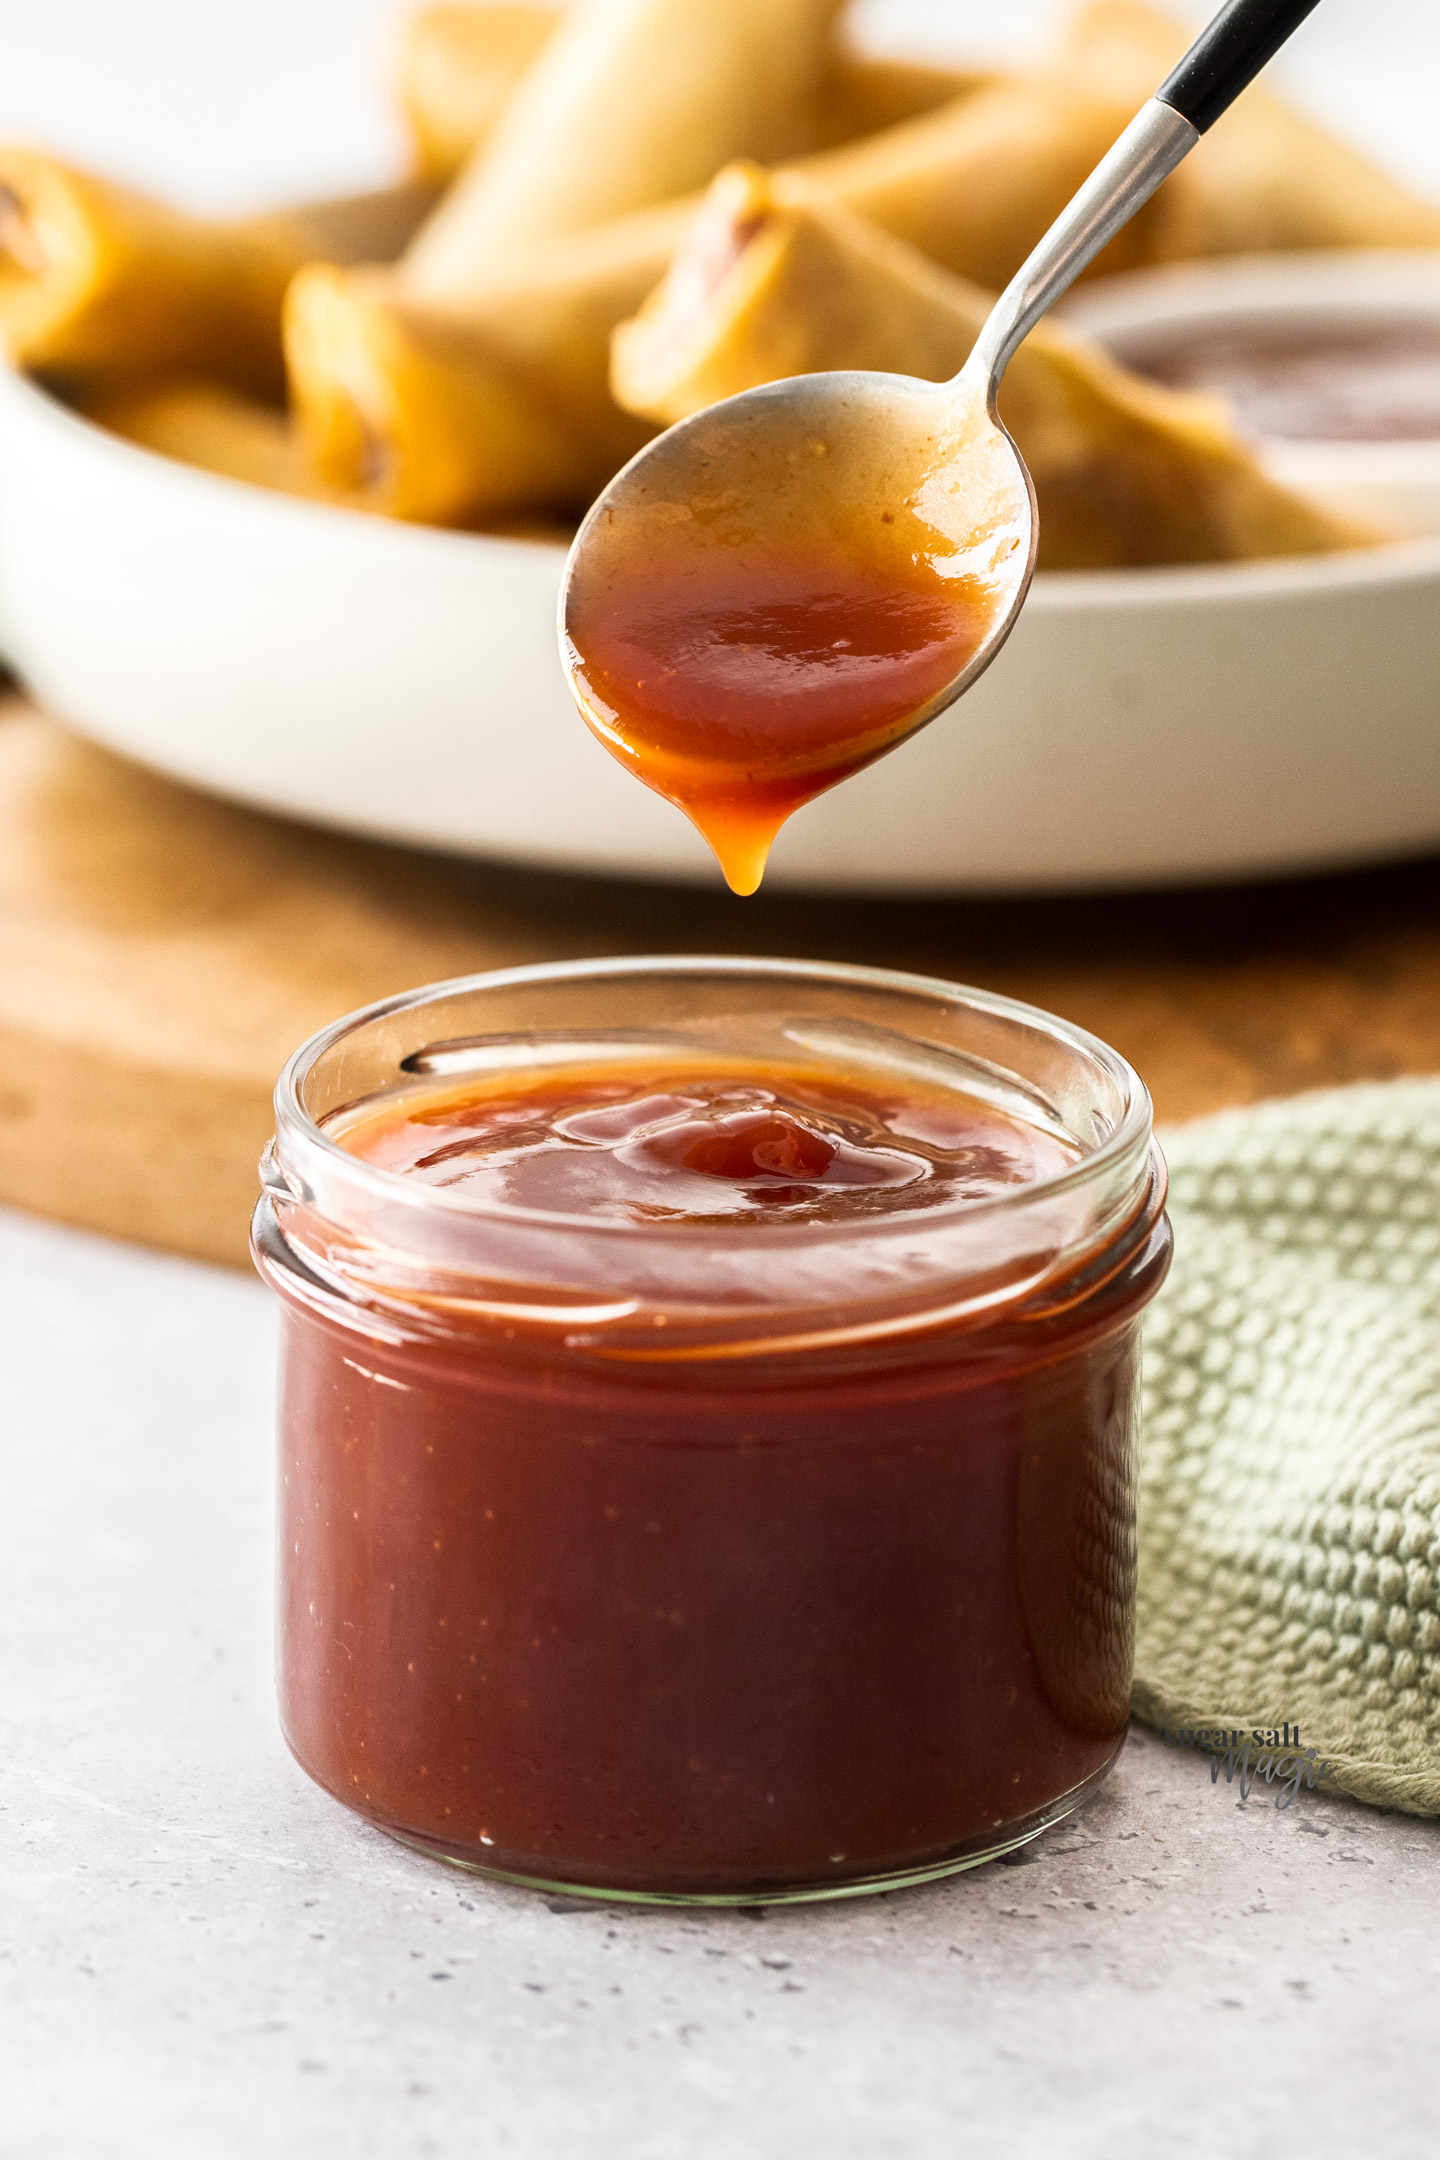 A spoon coming out of a jar with sweet and sour sauce.